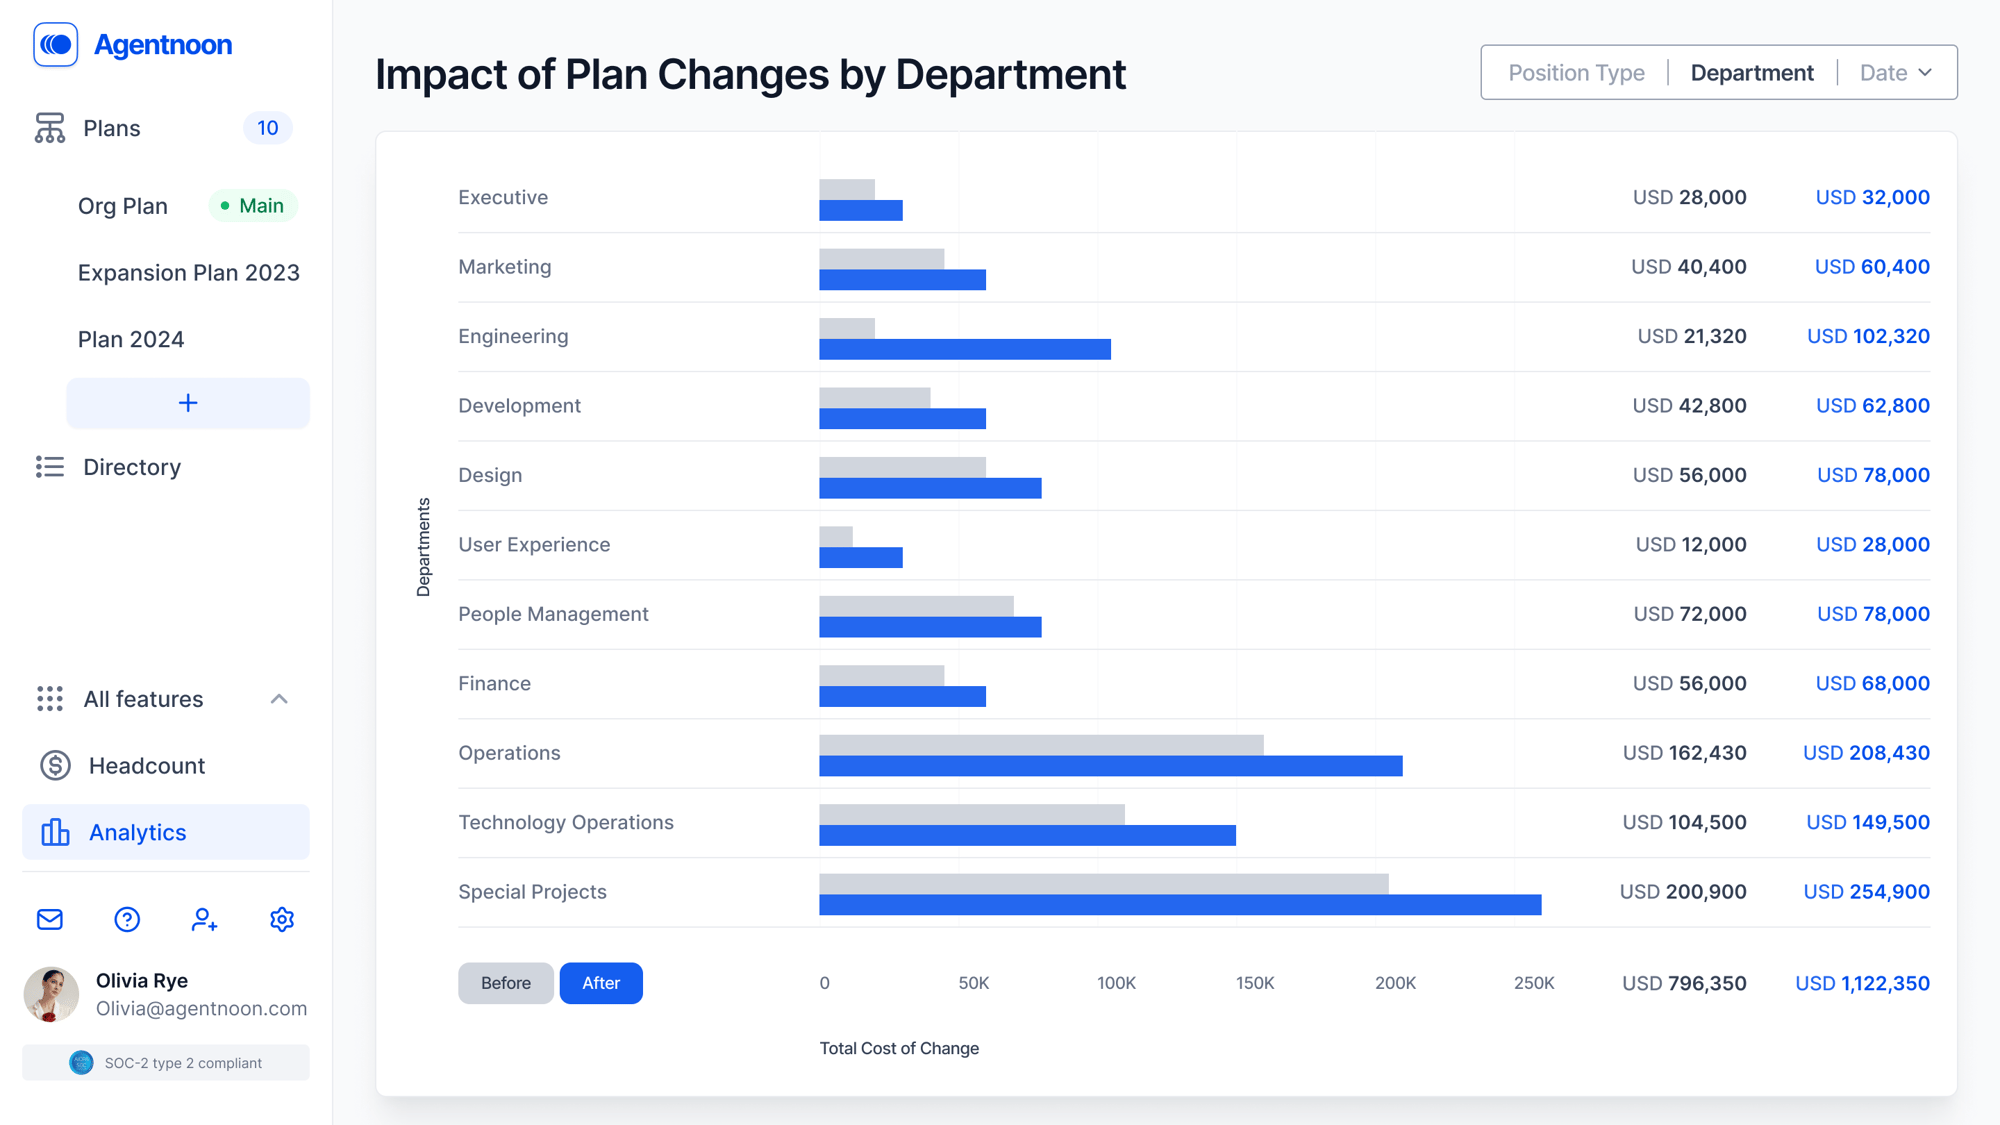 Understand impact of plan changes by department